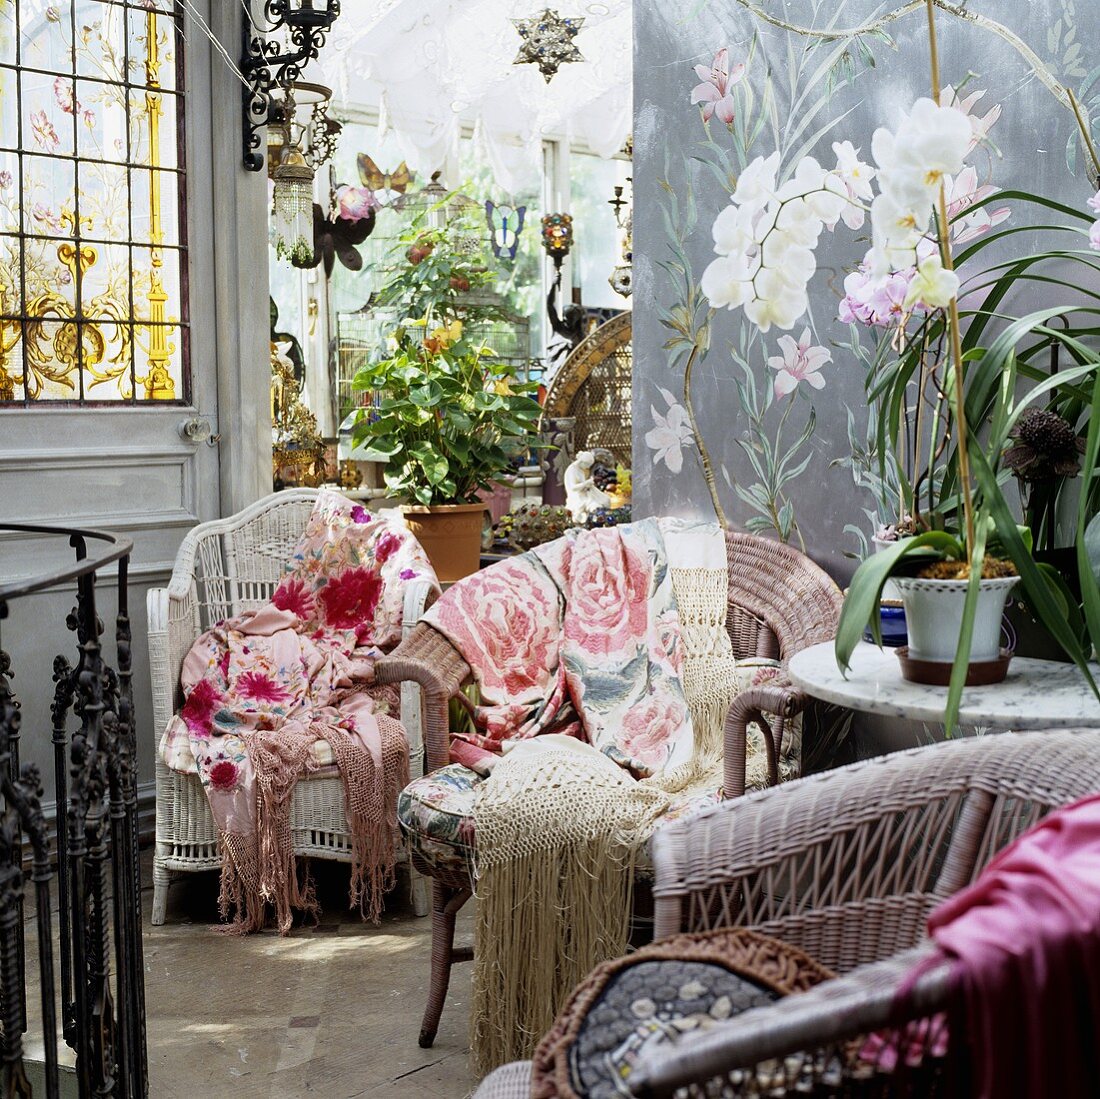 Wicker chairs with colourful throws and potted plants in a side room looking into a conservatory